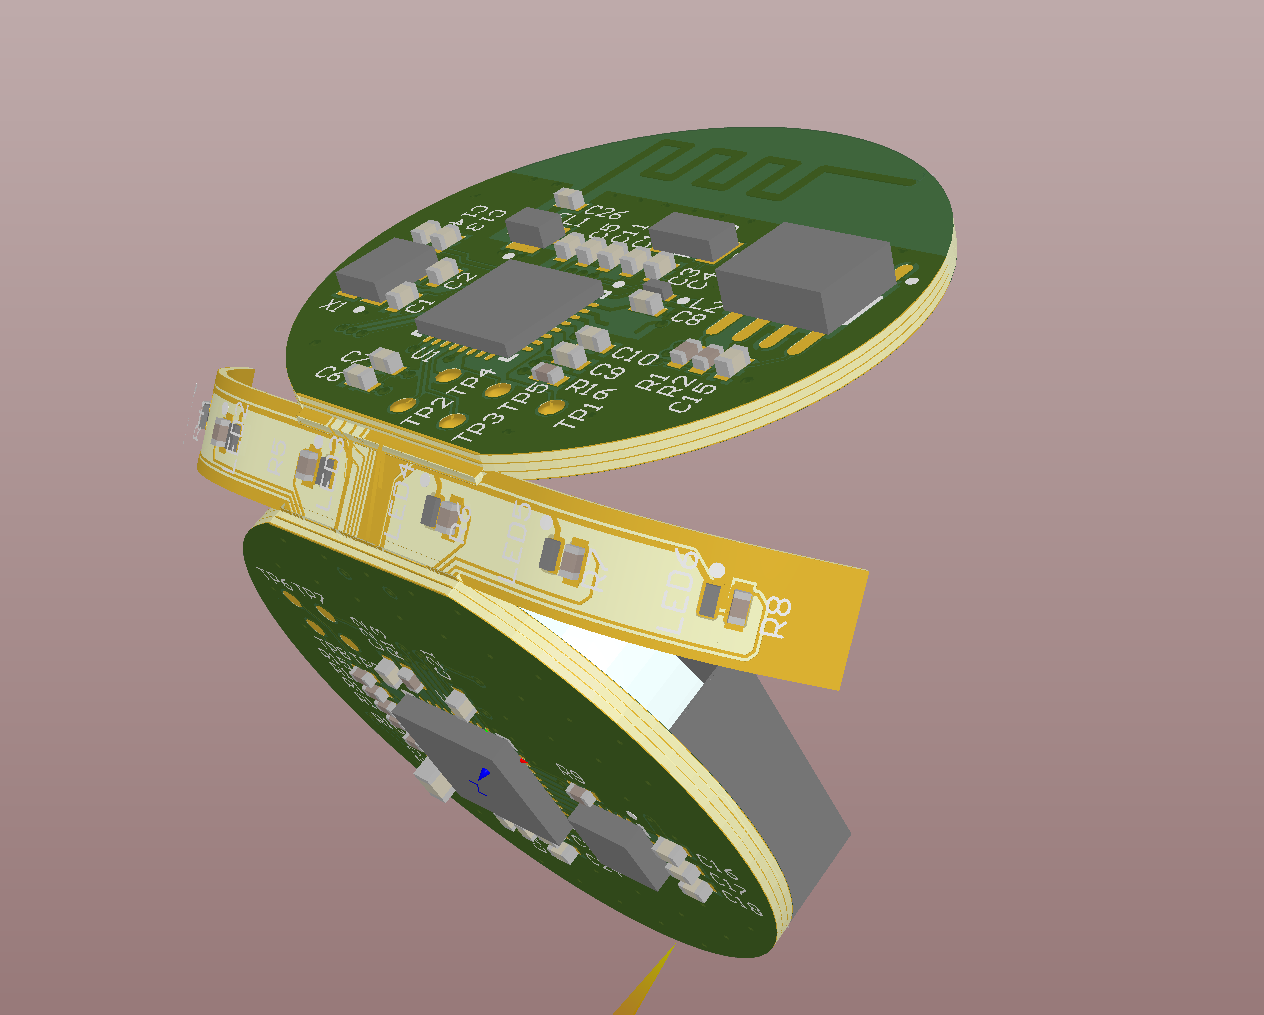 Flexible circuit board or hard and soft board production documents